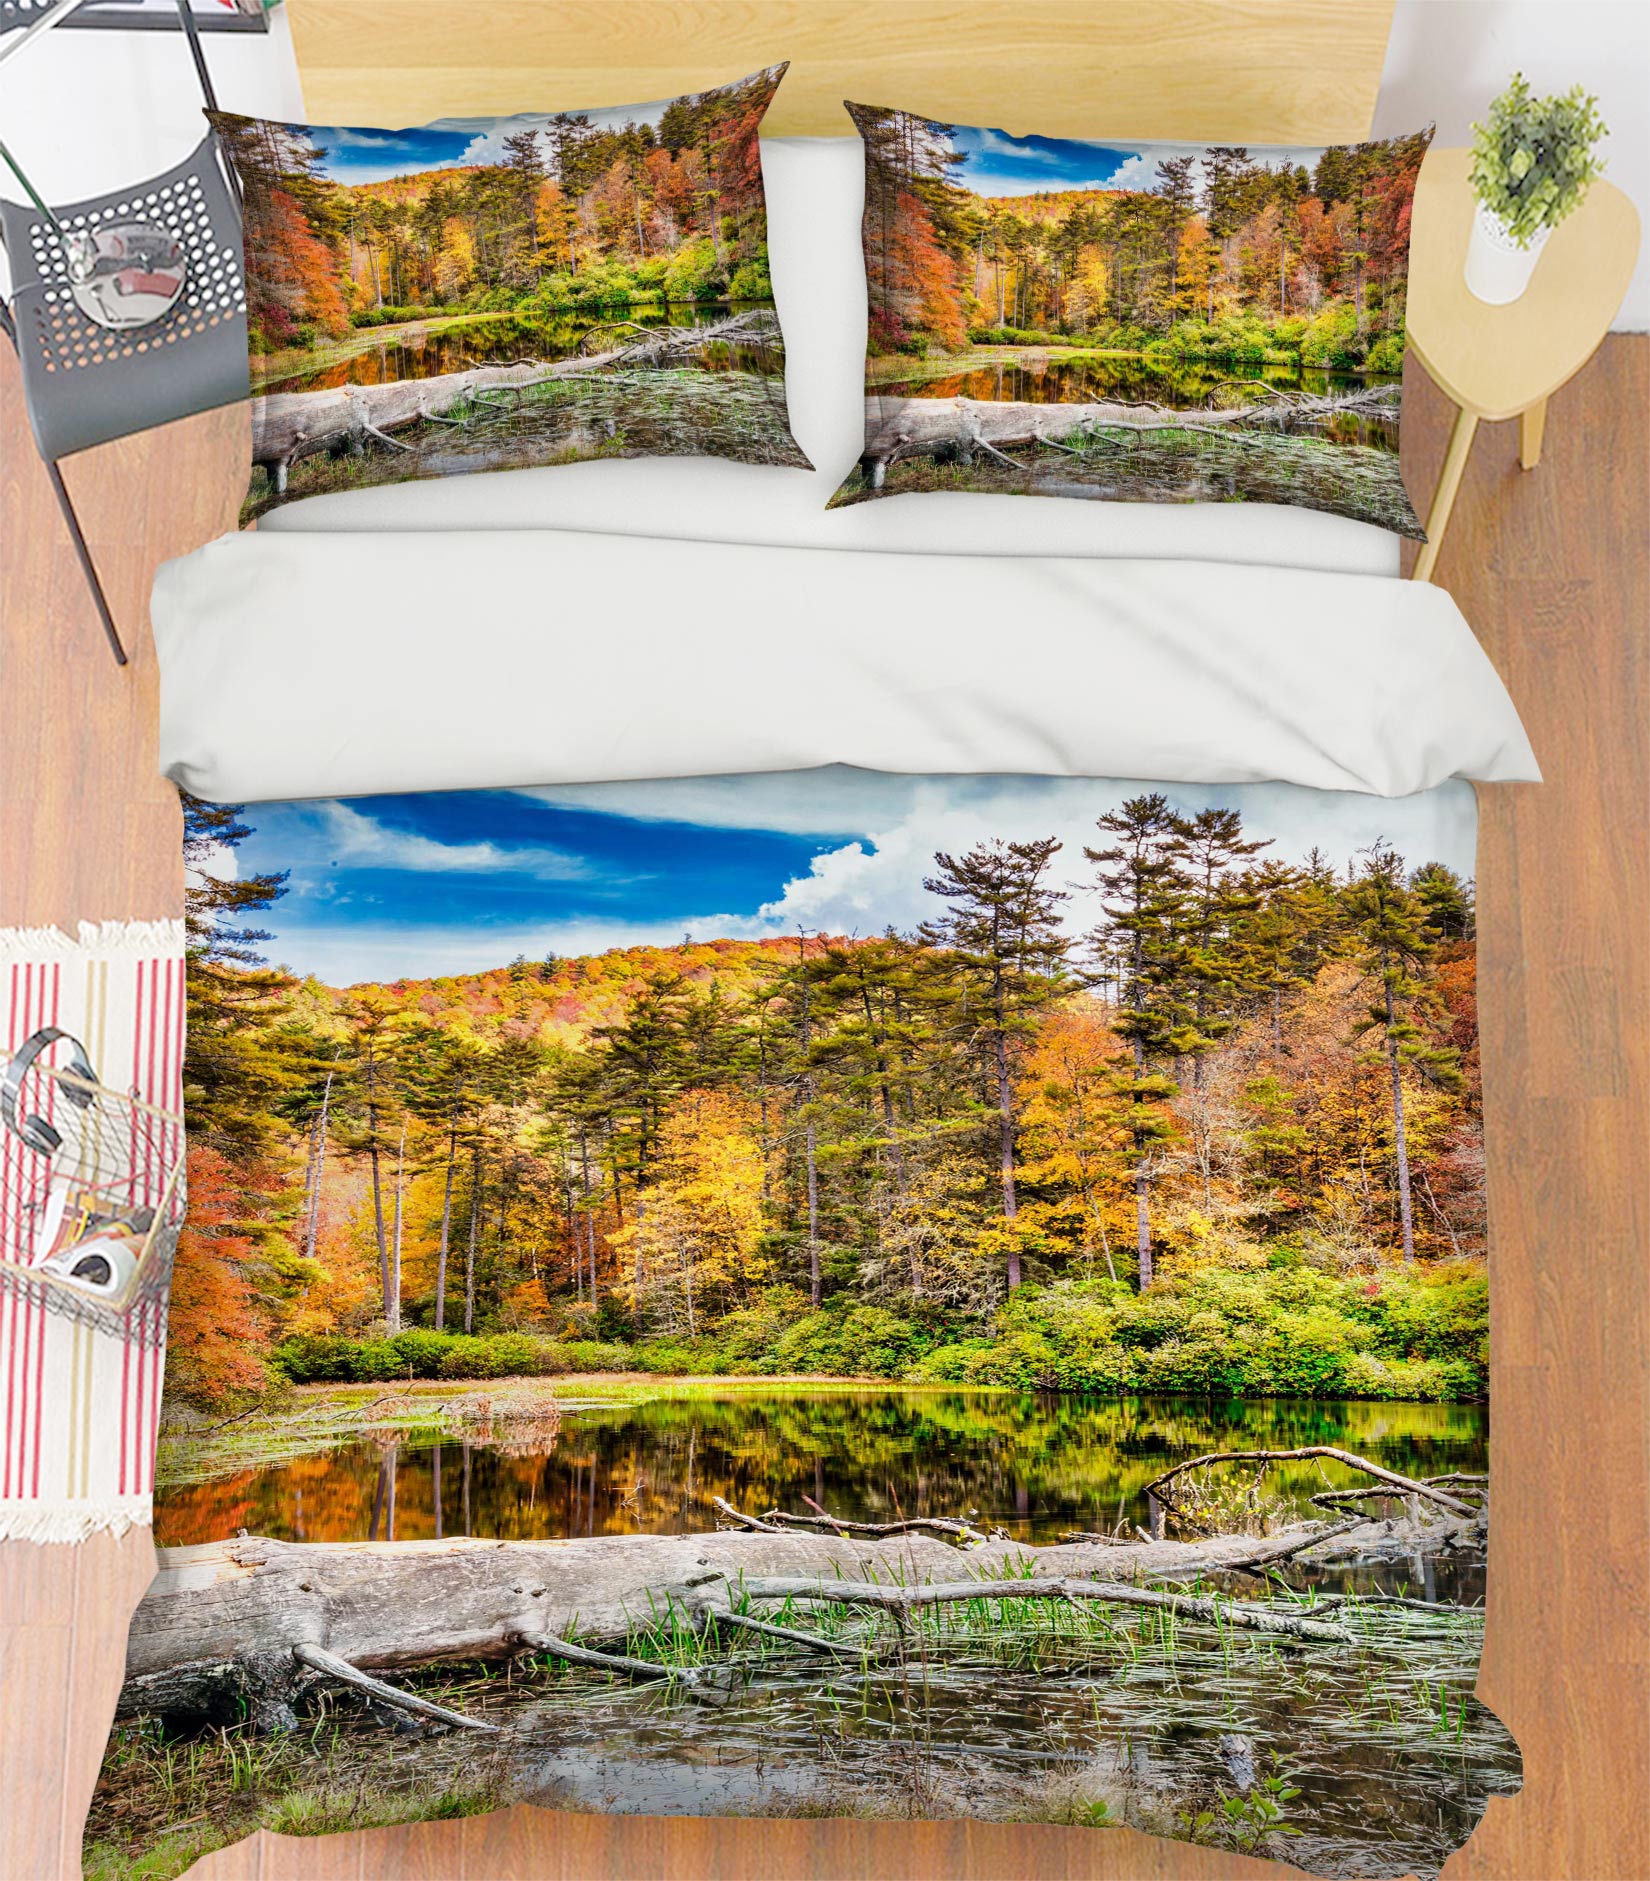 3D Forest 8563 Beth Sheridan Bedding Bed Pillowcases Quilt